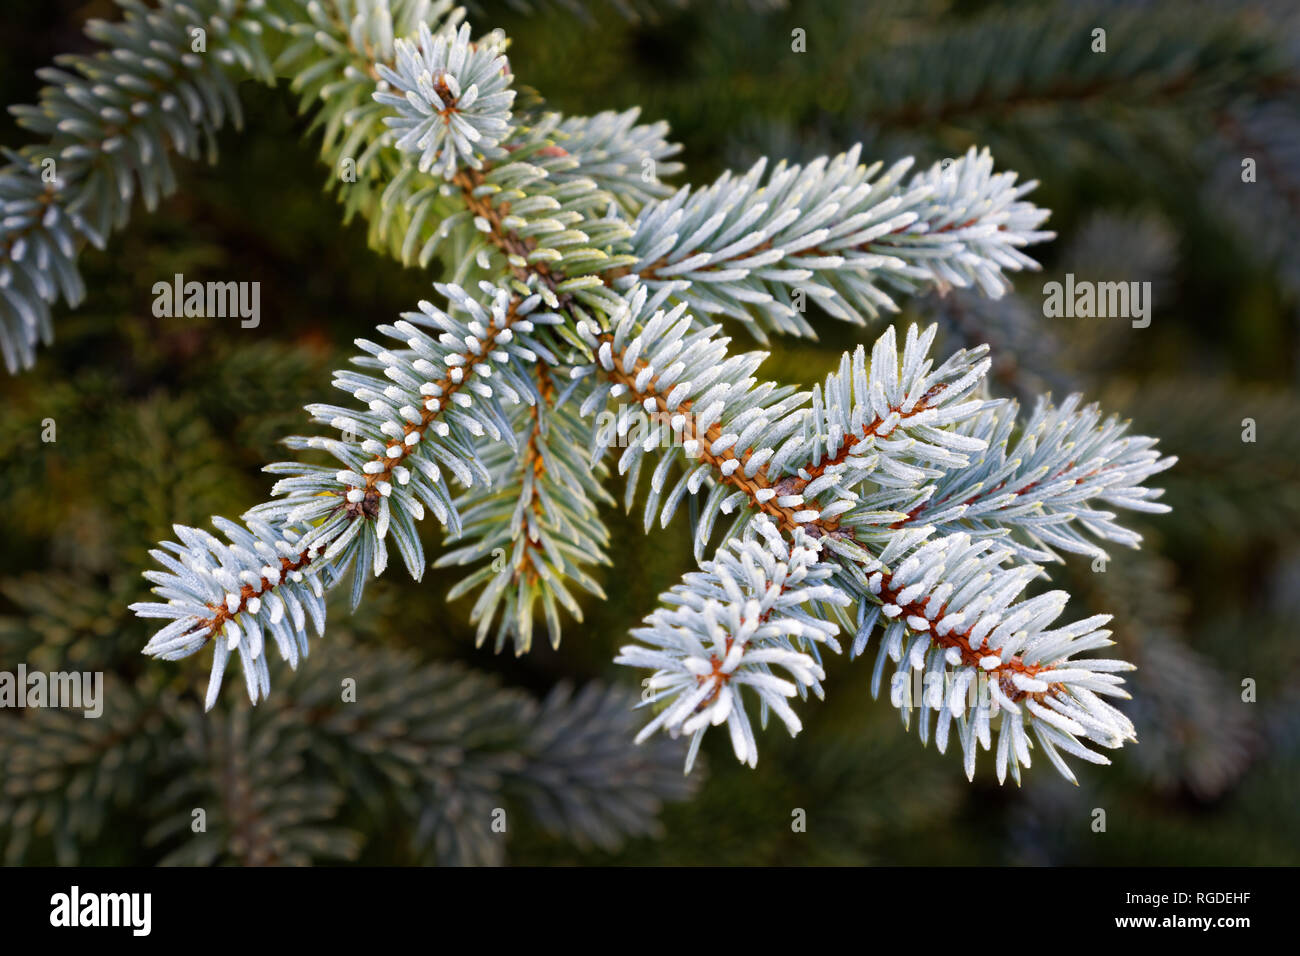 43,467.03857 Frosty, lightly frosted, green needles & branches on winter spruce tree (Picea species, Pinaceae), dark green background, horizontal Stock Photo